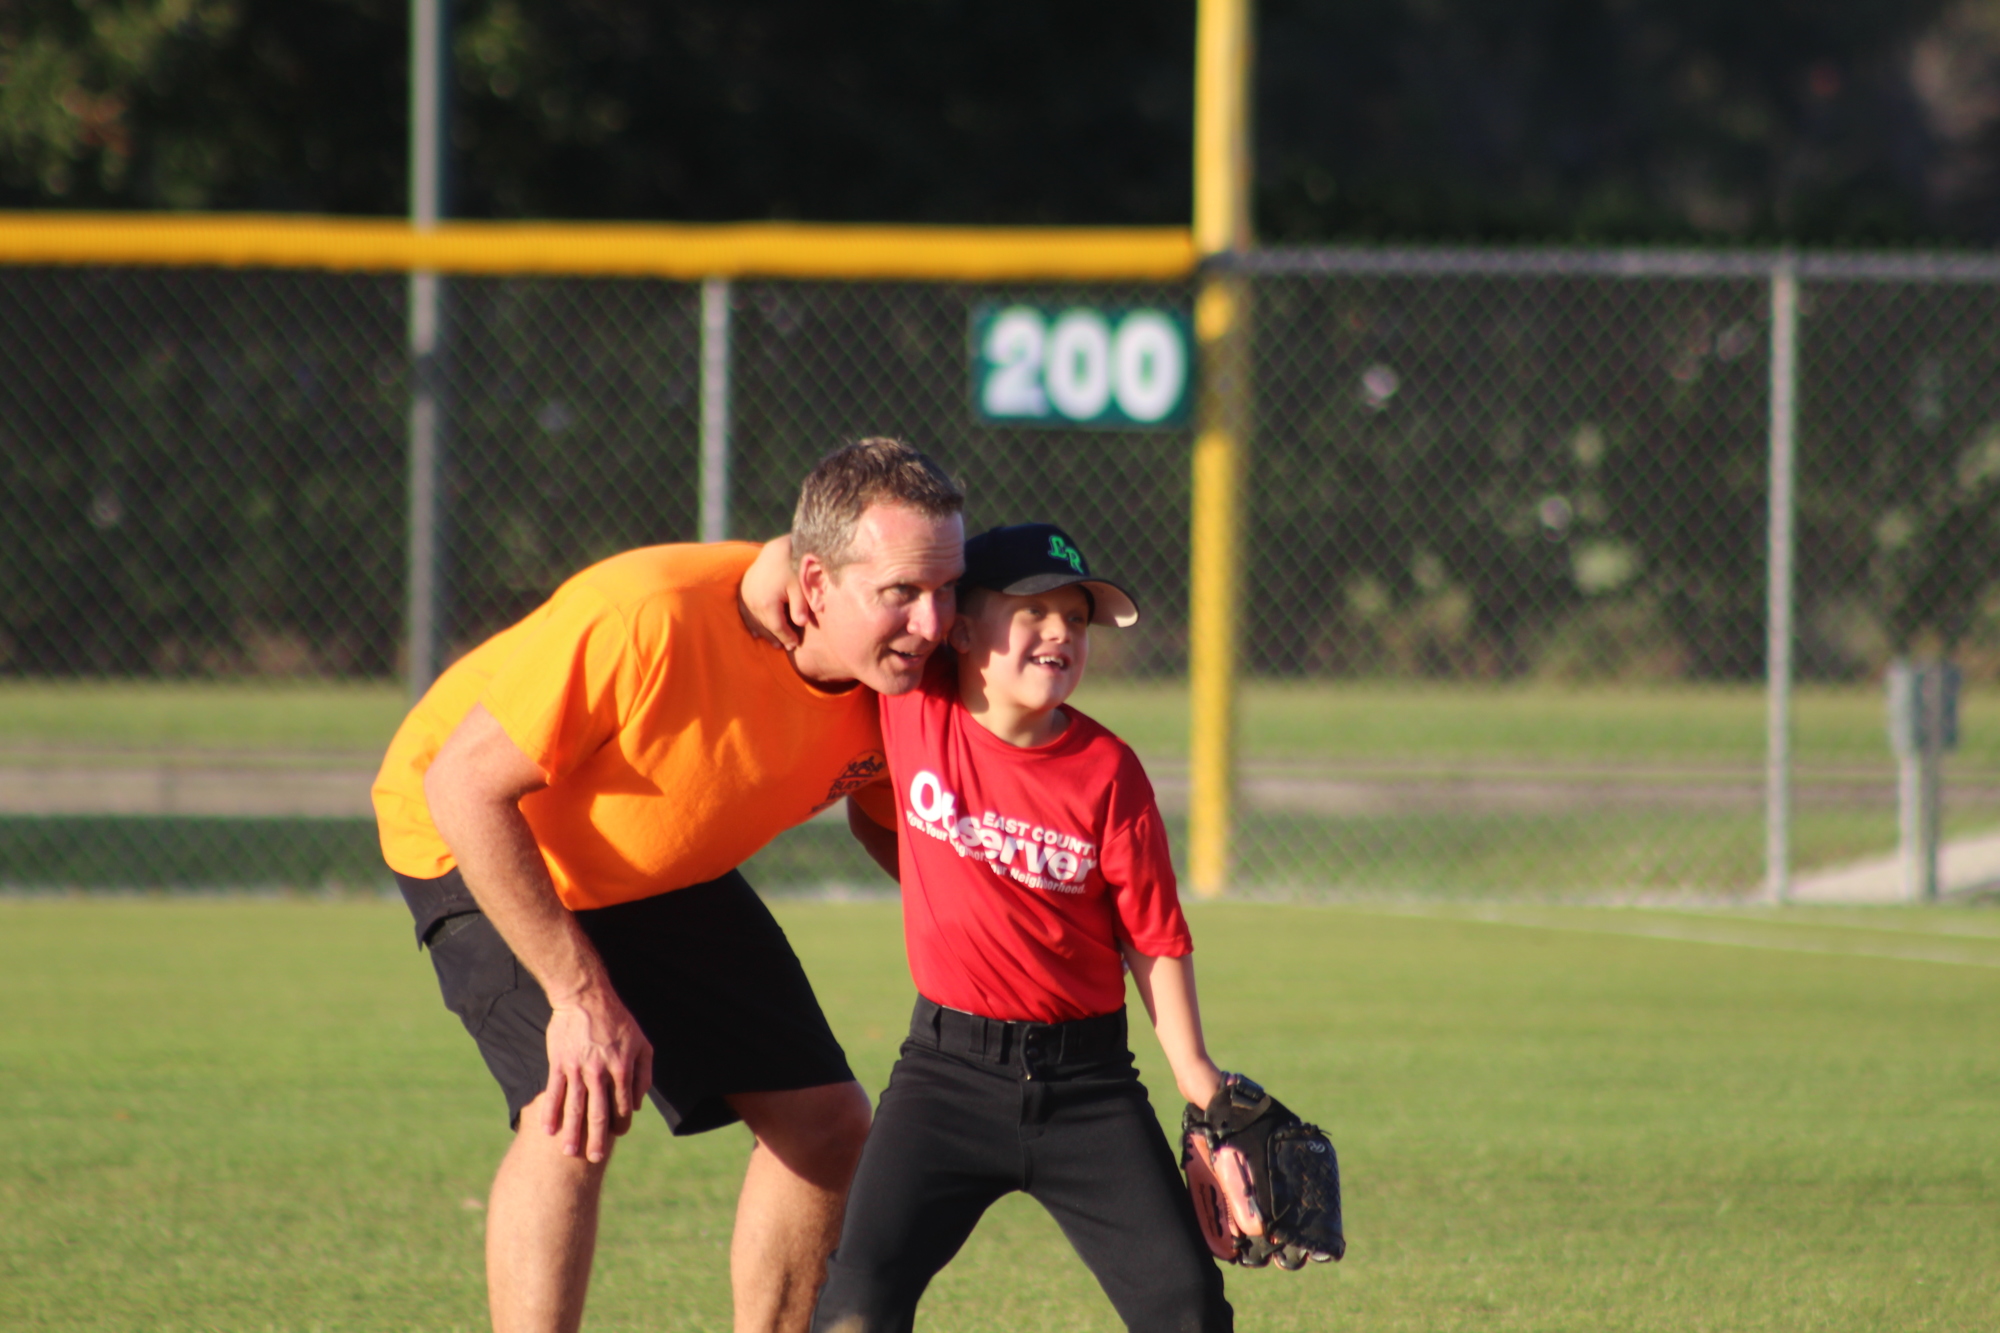 GreyHawk Landing’s Randy and Cameron Cody share a hug before Cameron’s Little League game in Lakewood Ranch.